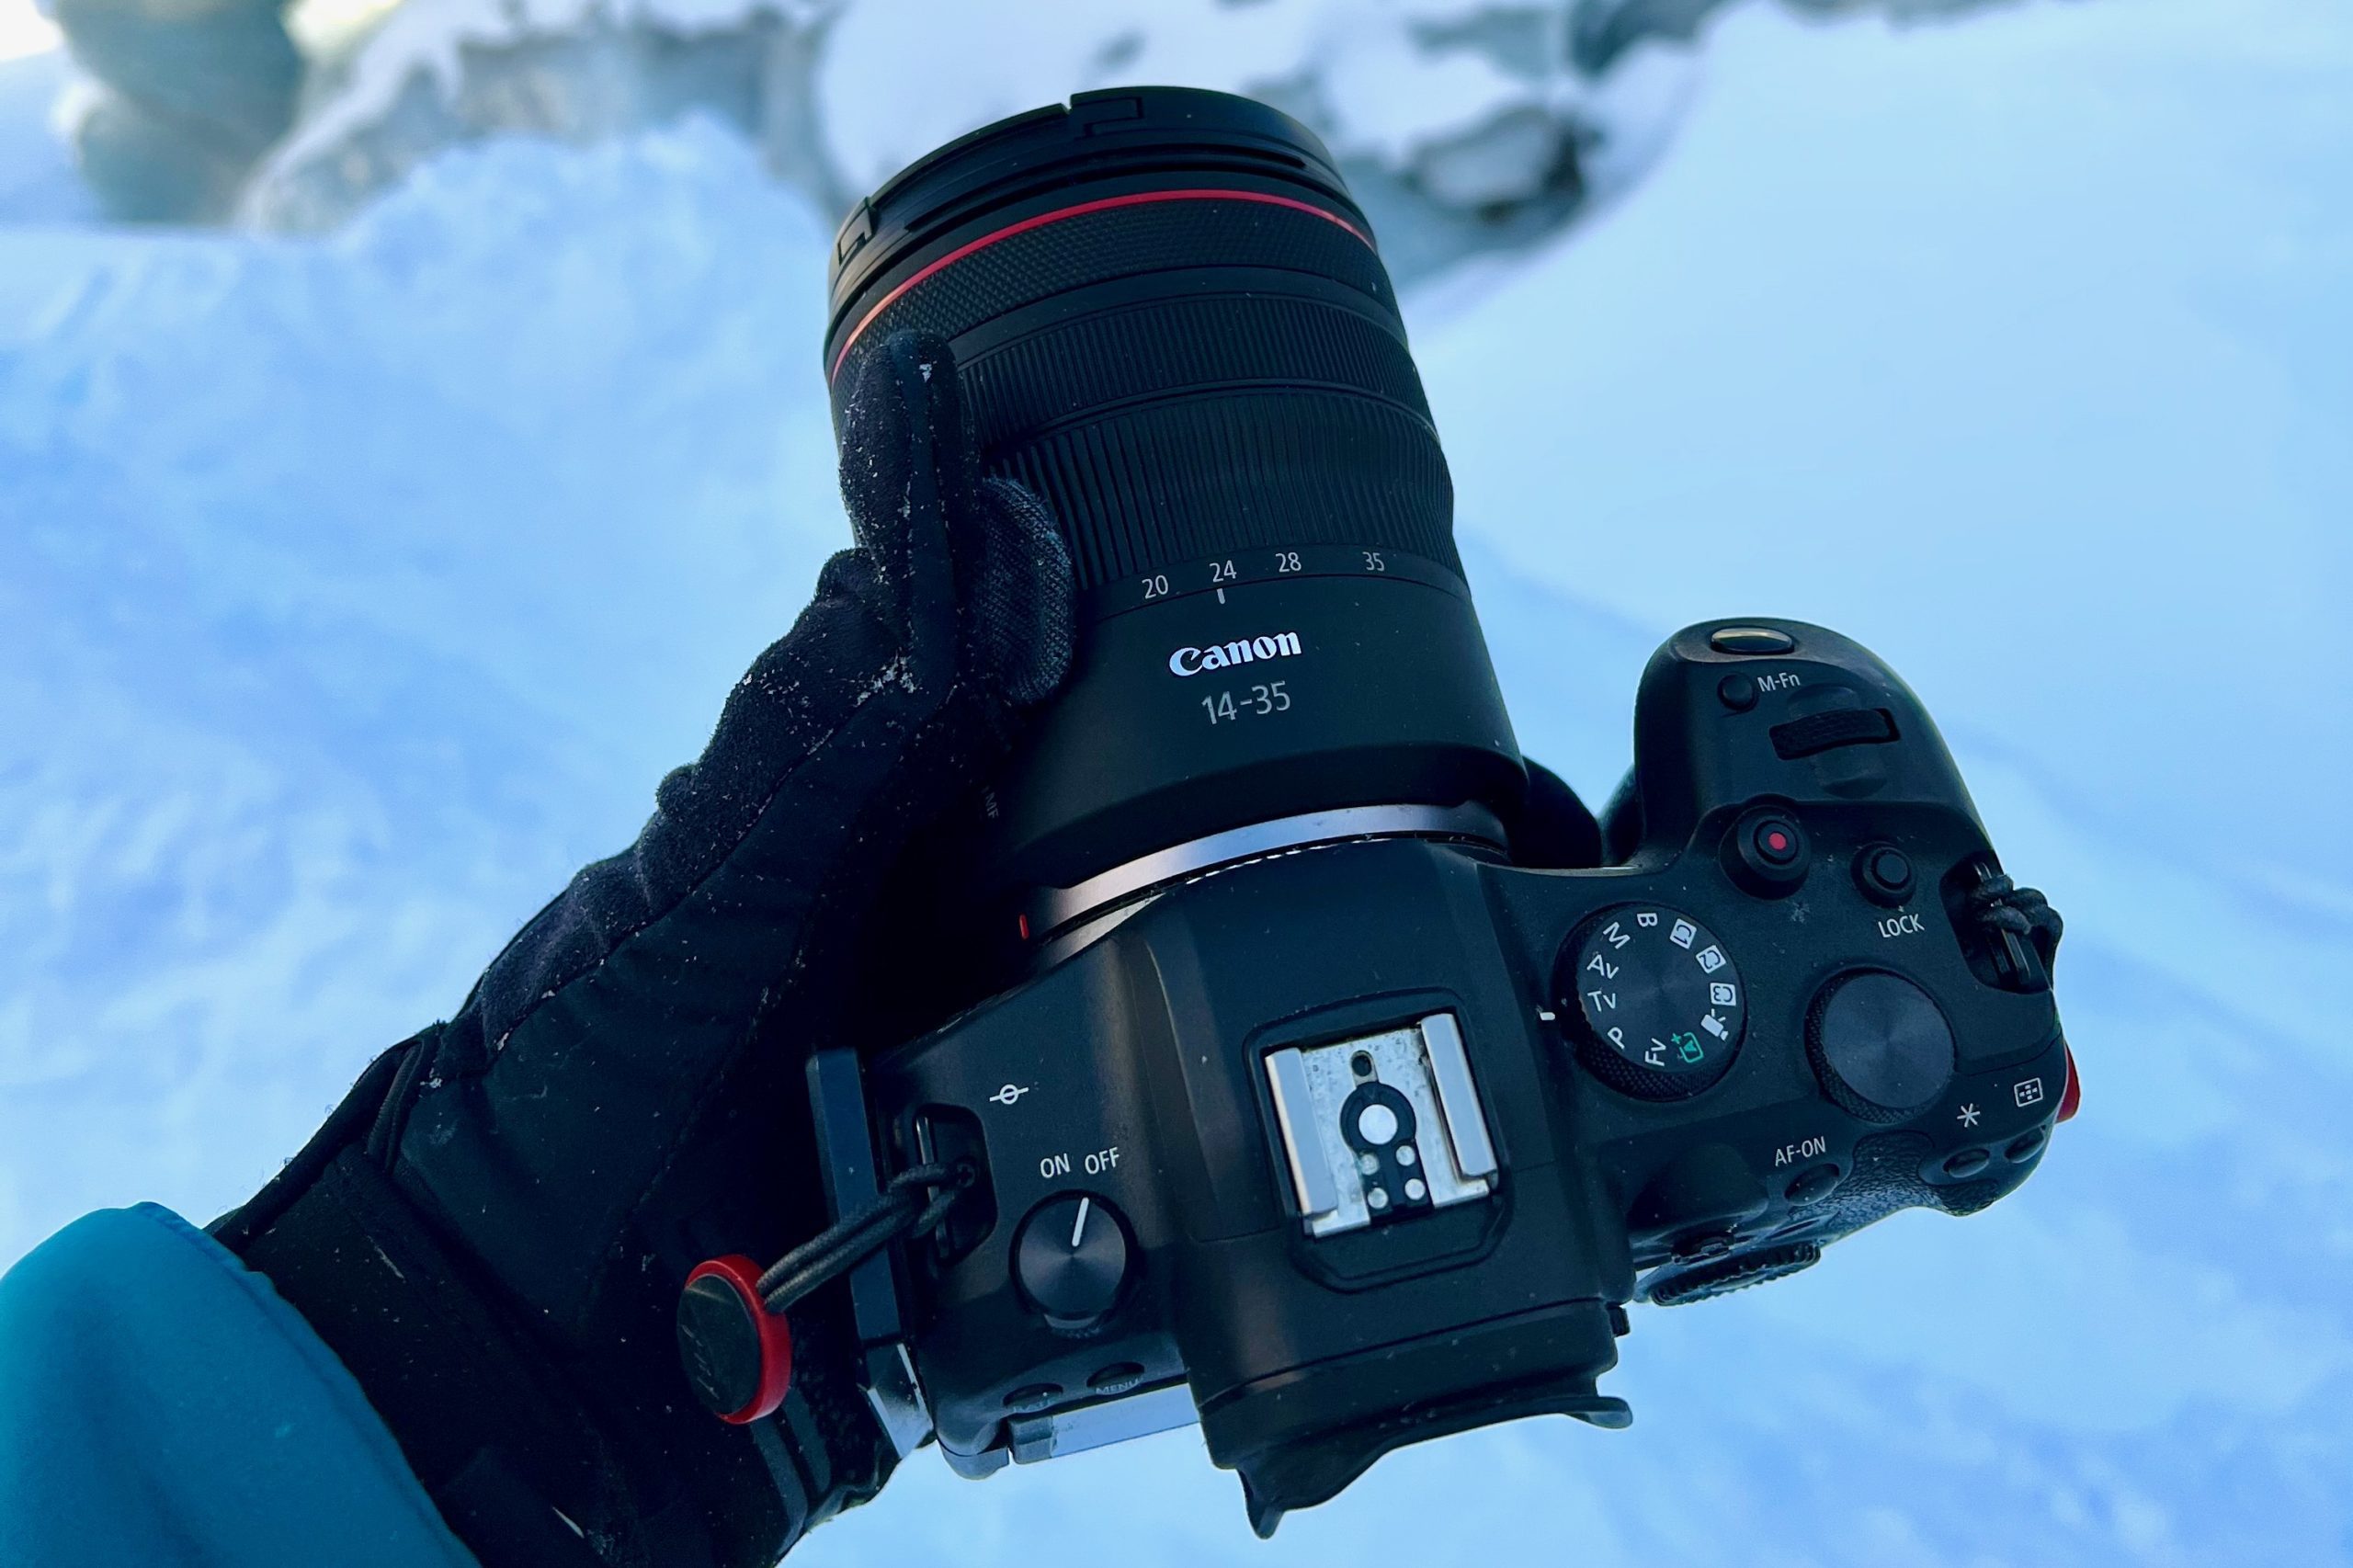 Canon RF 14-35mm f/4L Lens Underwater Review [VIDEO]